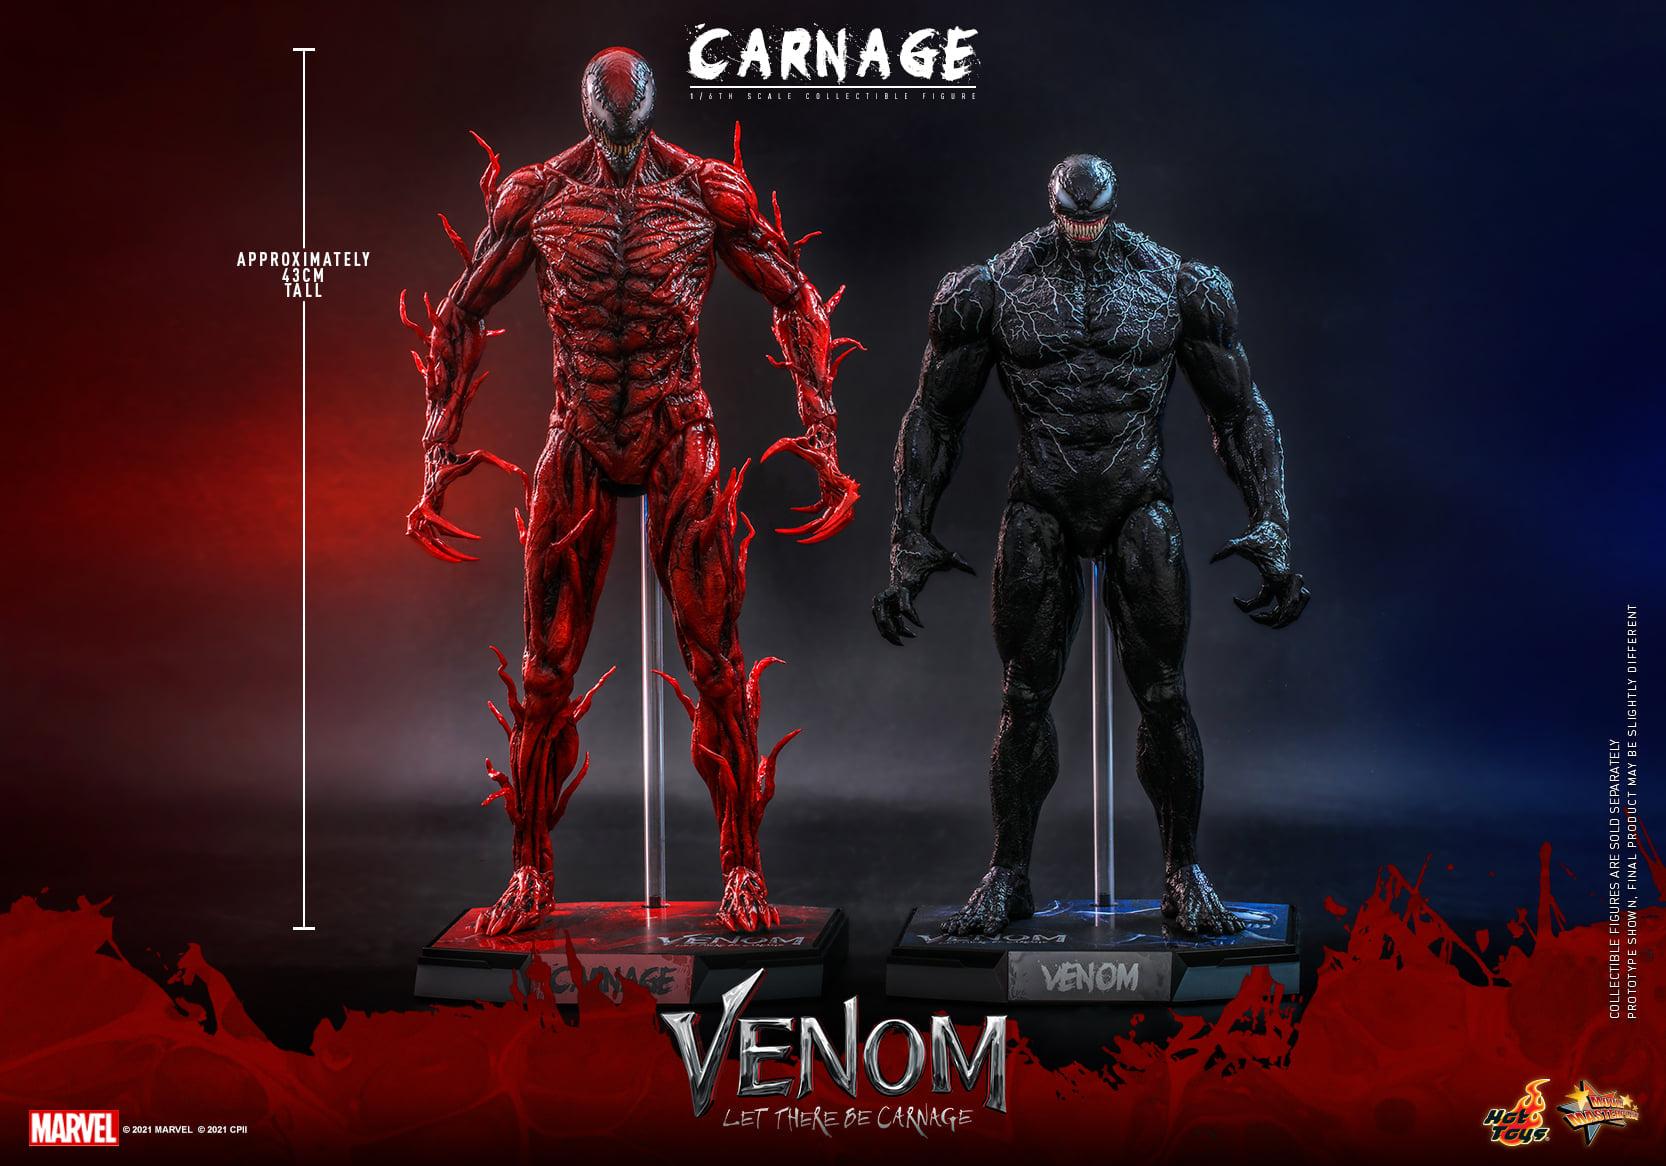 Hot Toys - MMS619 - Venom: Let There Be Carnage - Carnage - Marvelous Toys